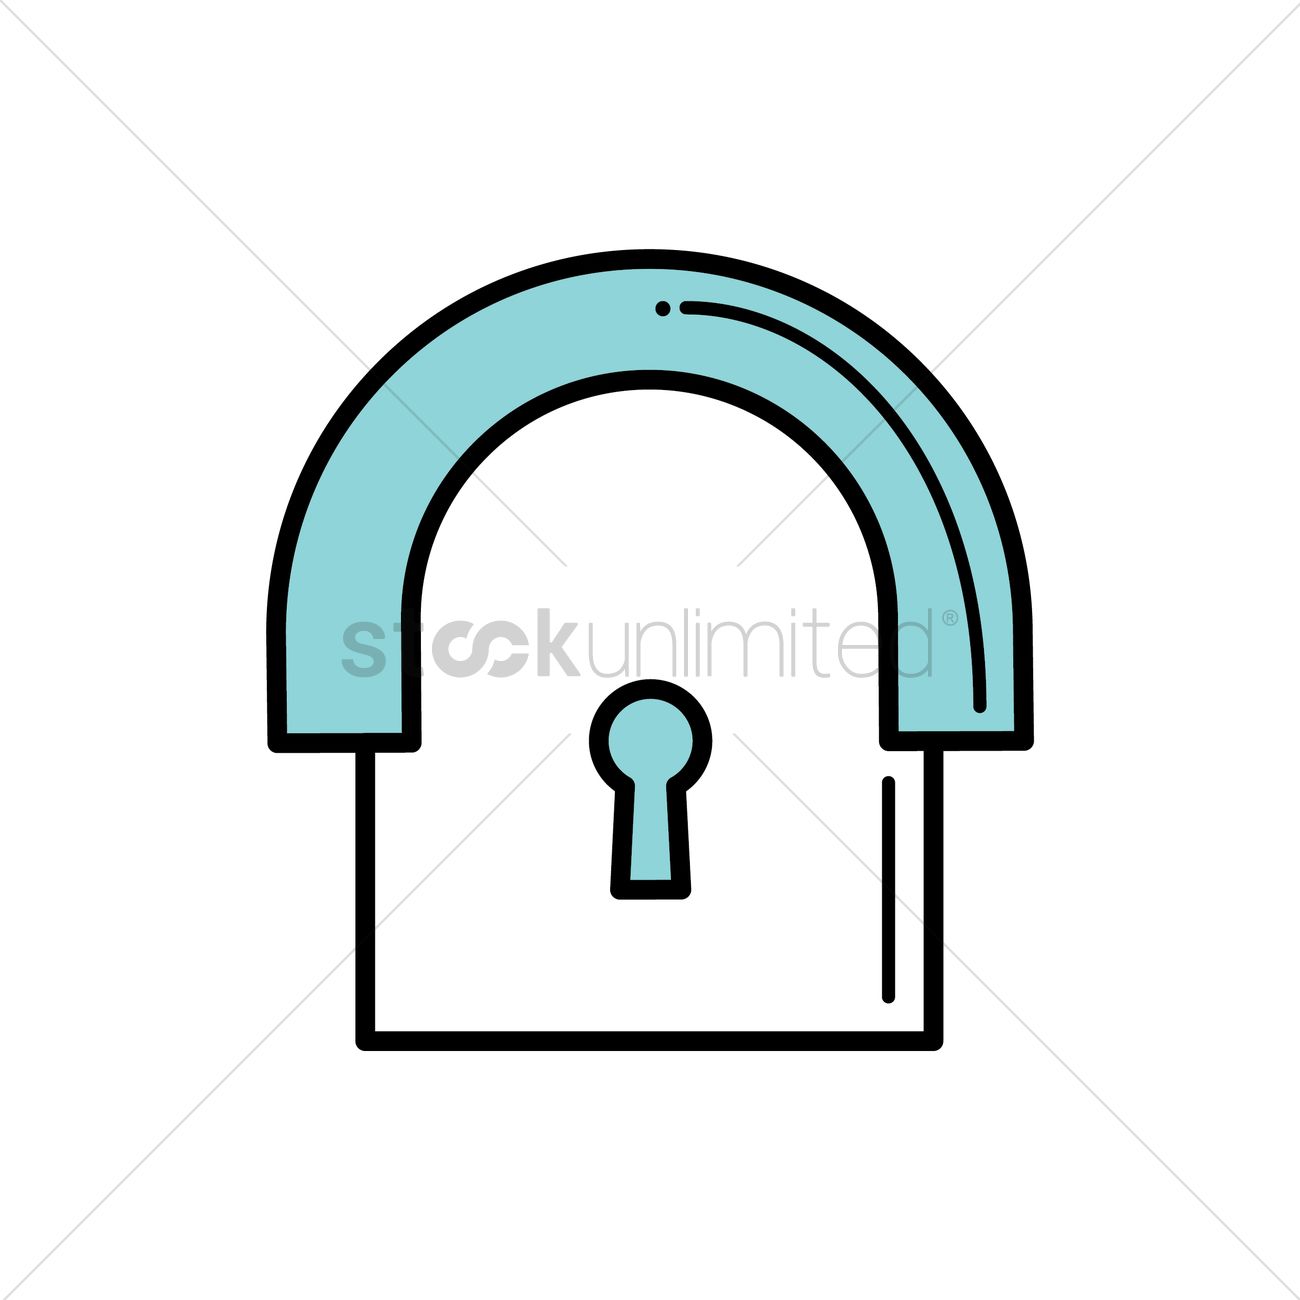 Keyhole Arch clipart #17, Download drawings